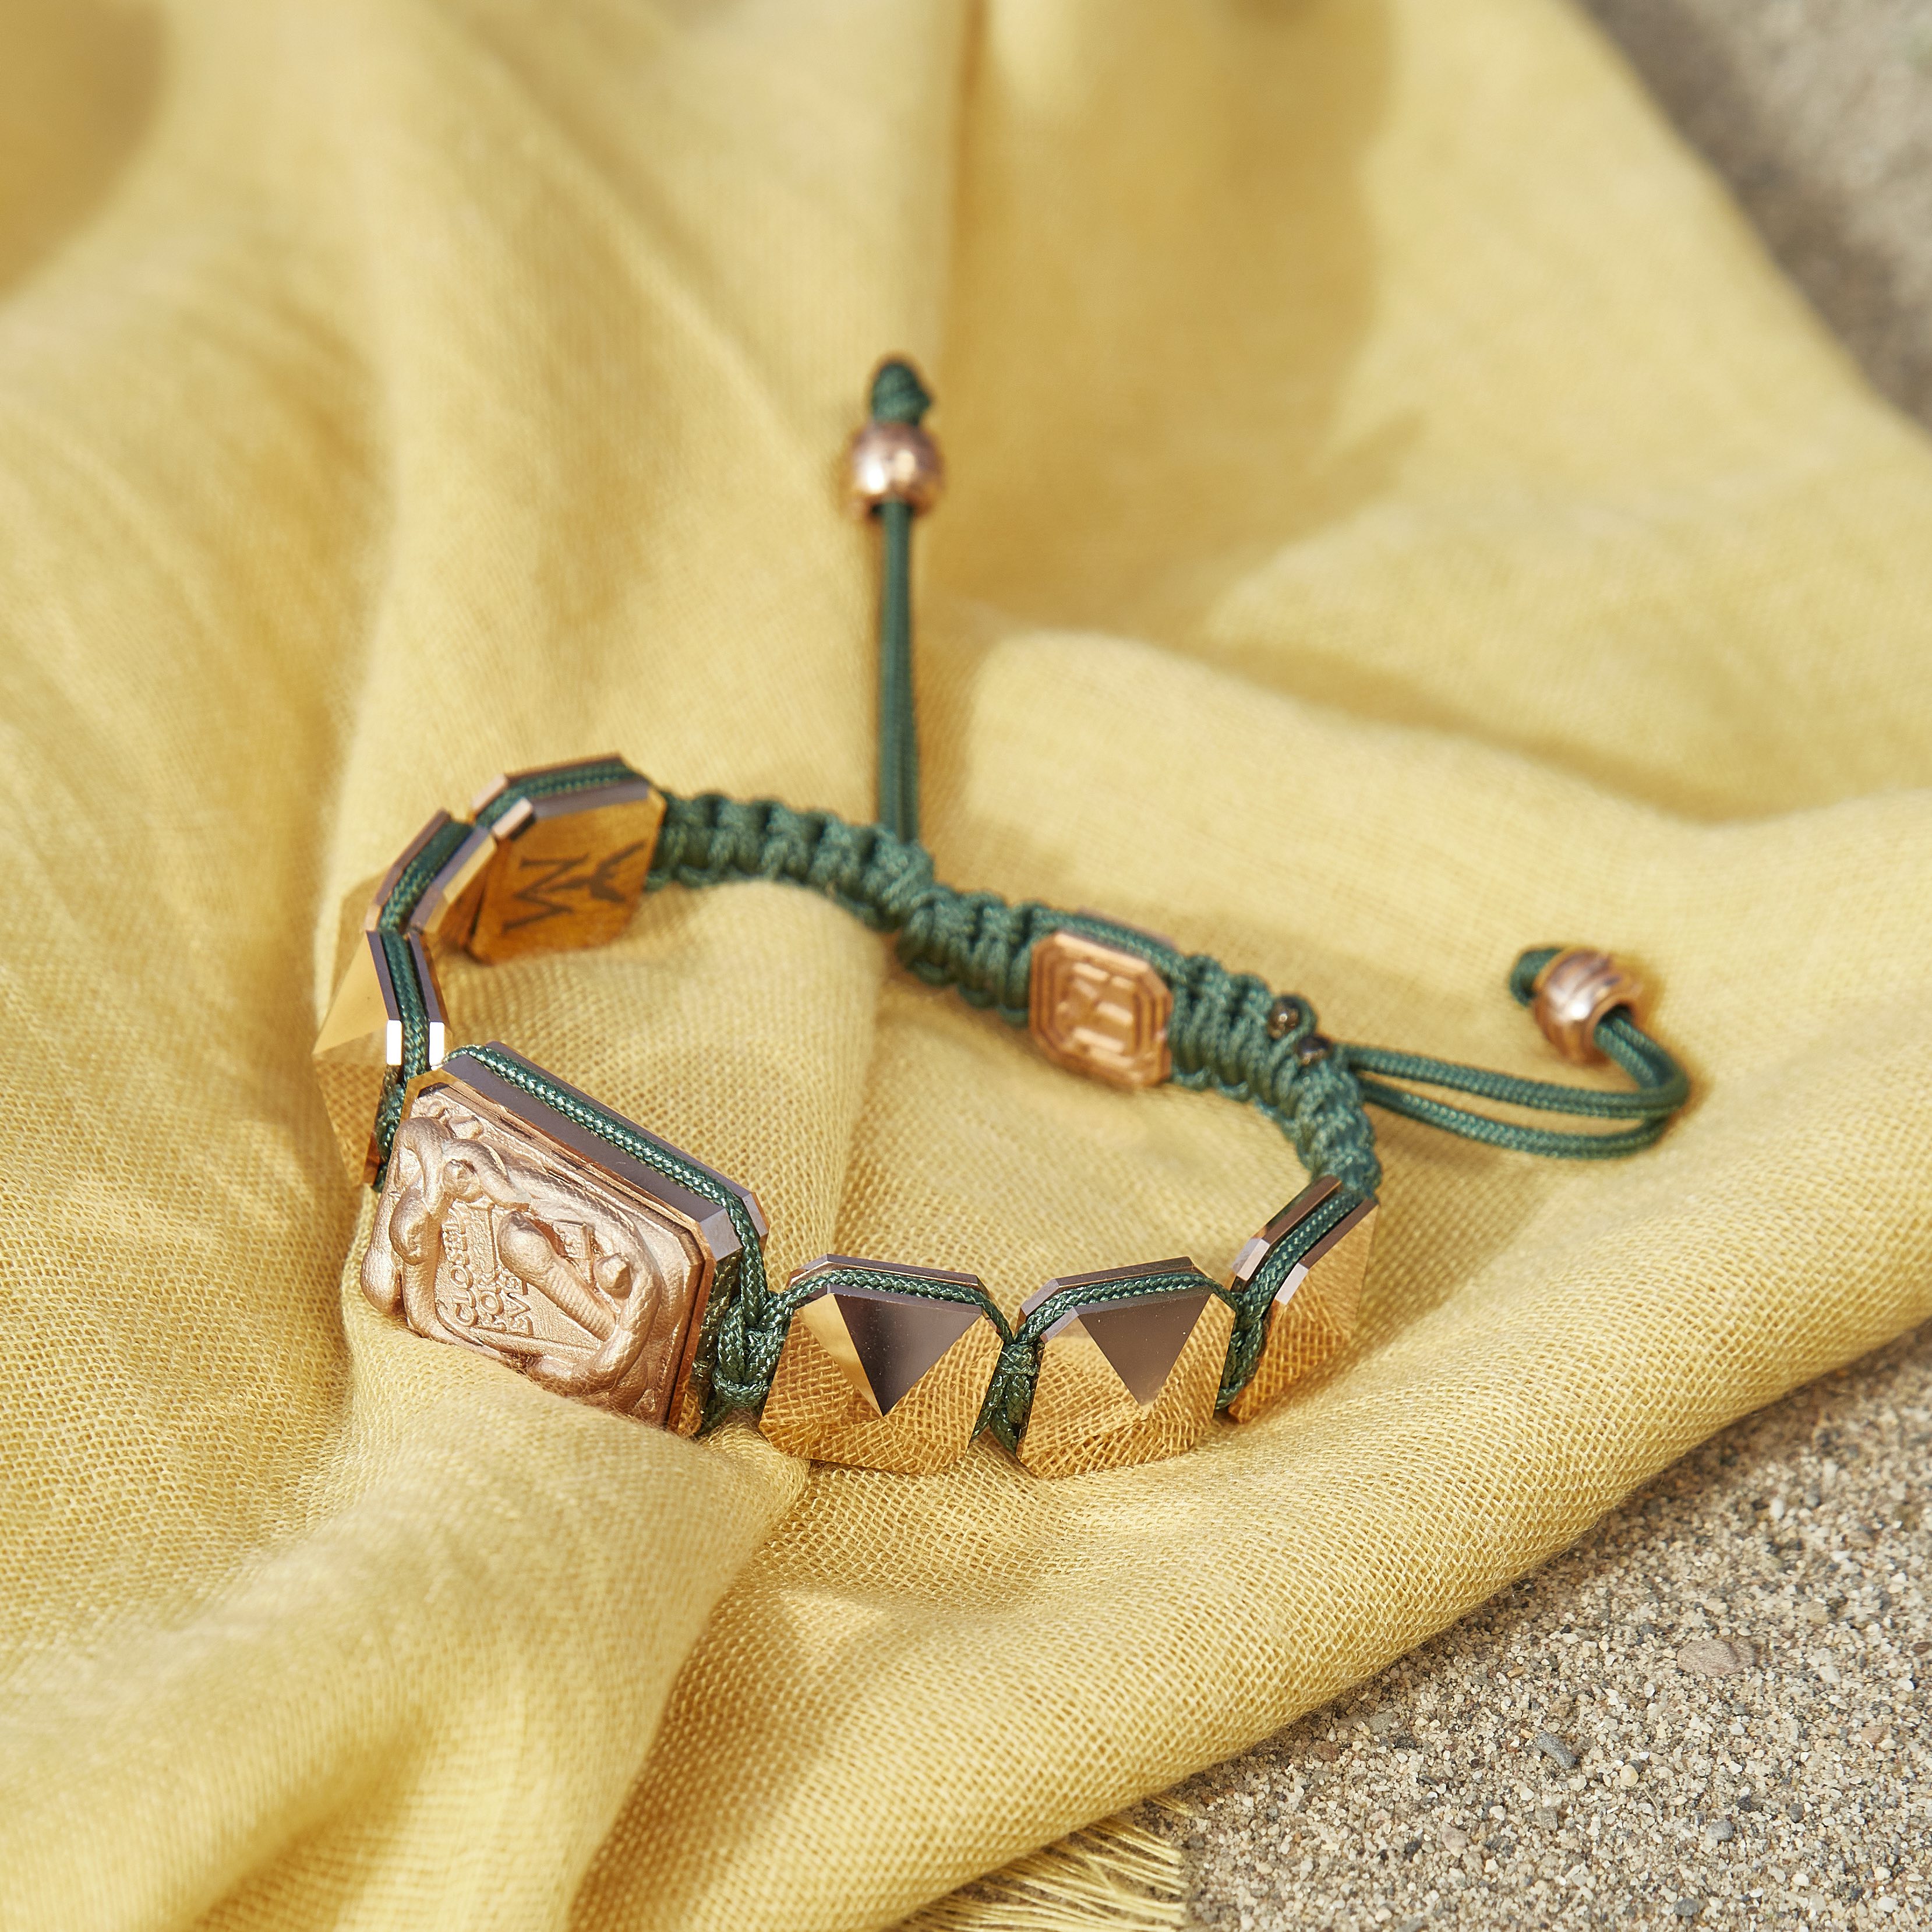 Miss You bracelet with ceramic and sculpture finished in 18k Rose Gold complemented with a dark green coloured cord.